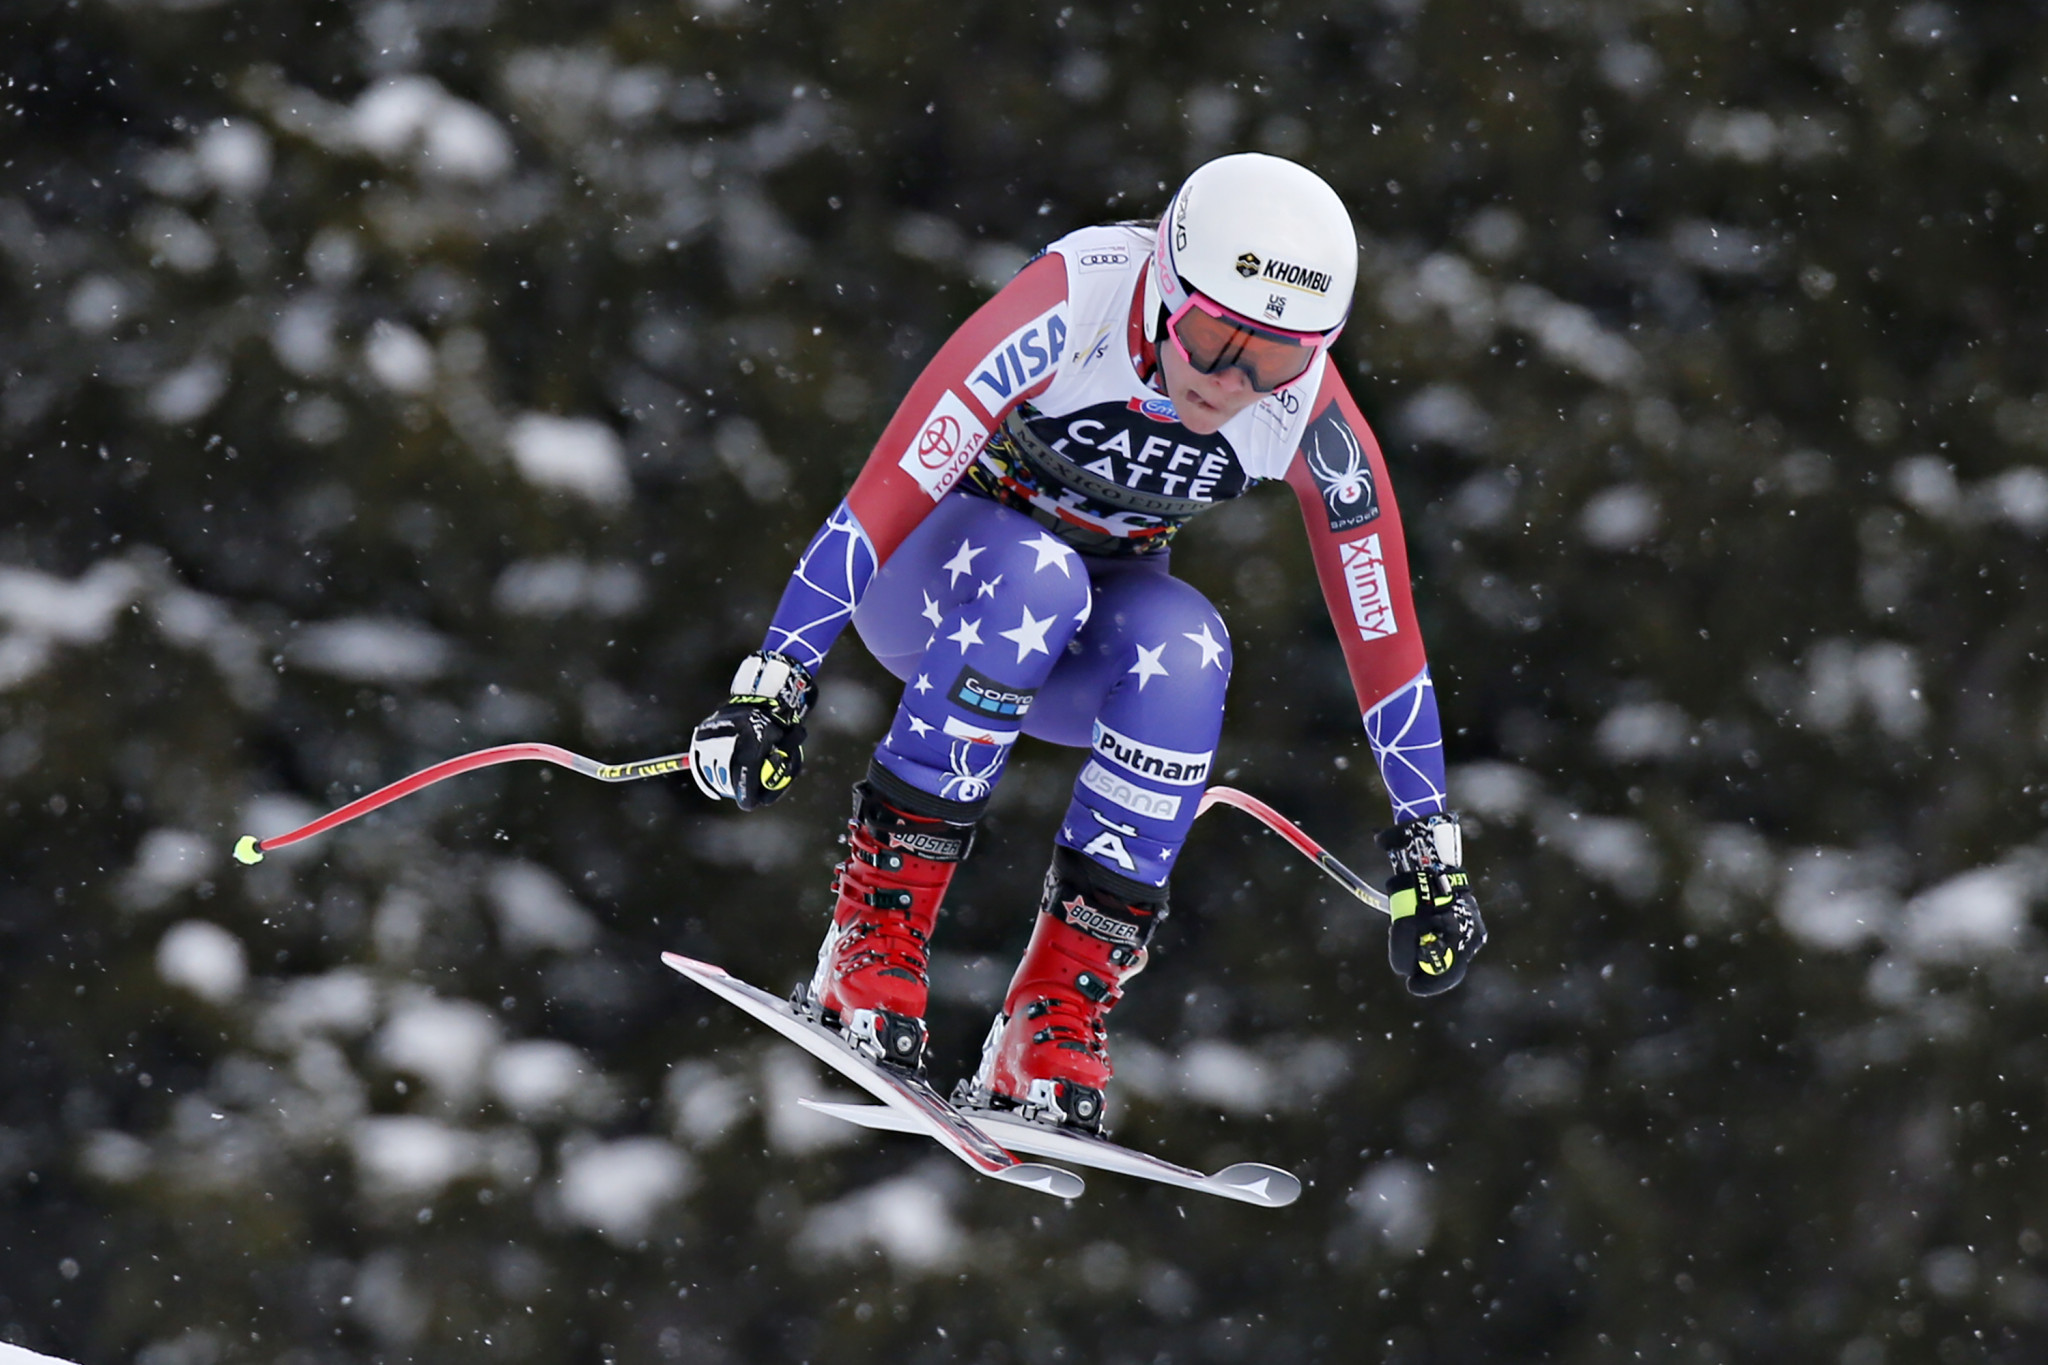 US downhill skier Johnson suffers serious knee injury during training camp in Chile